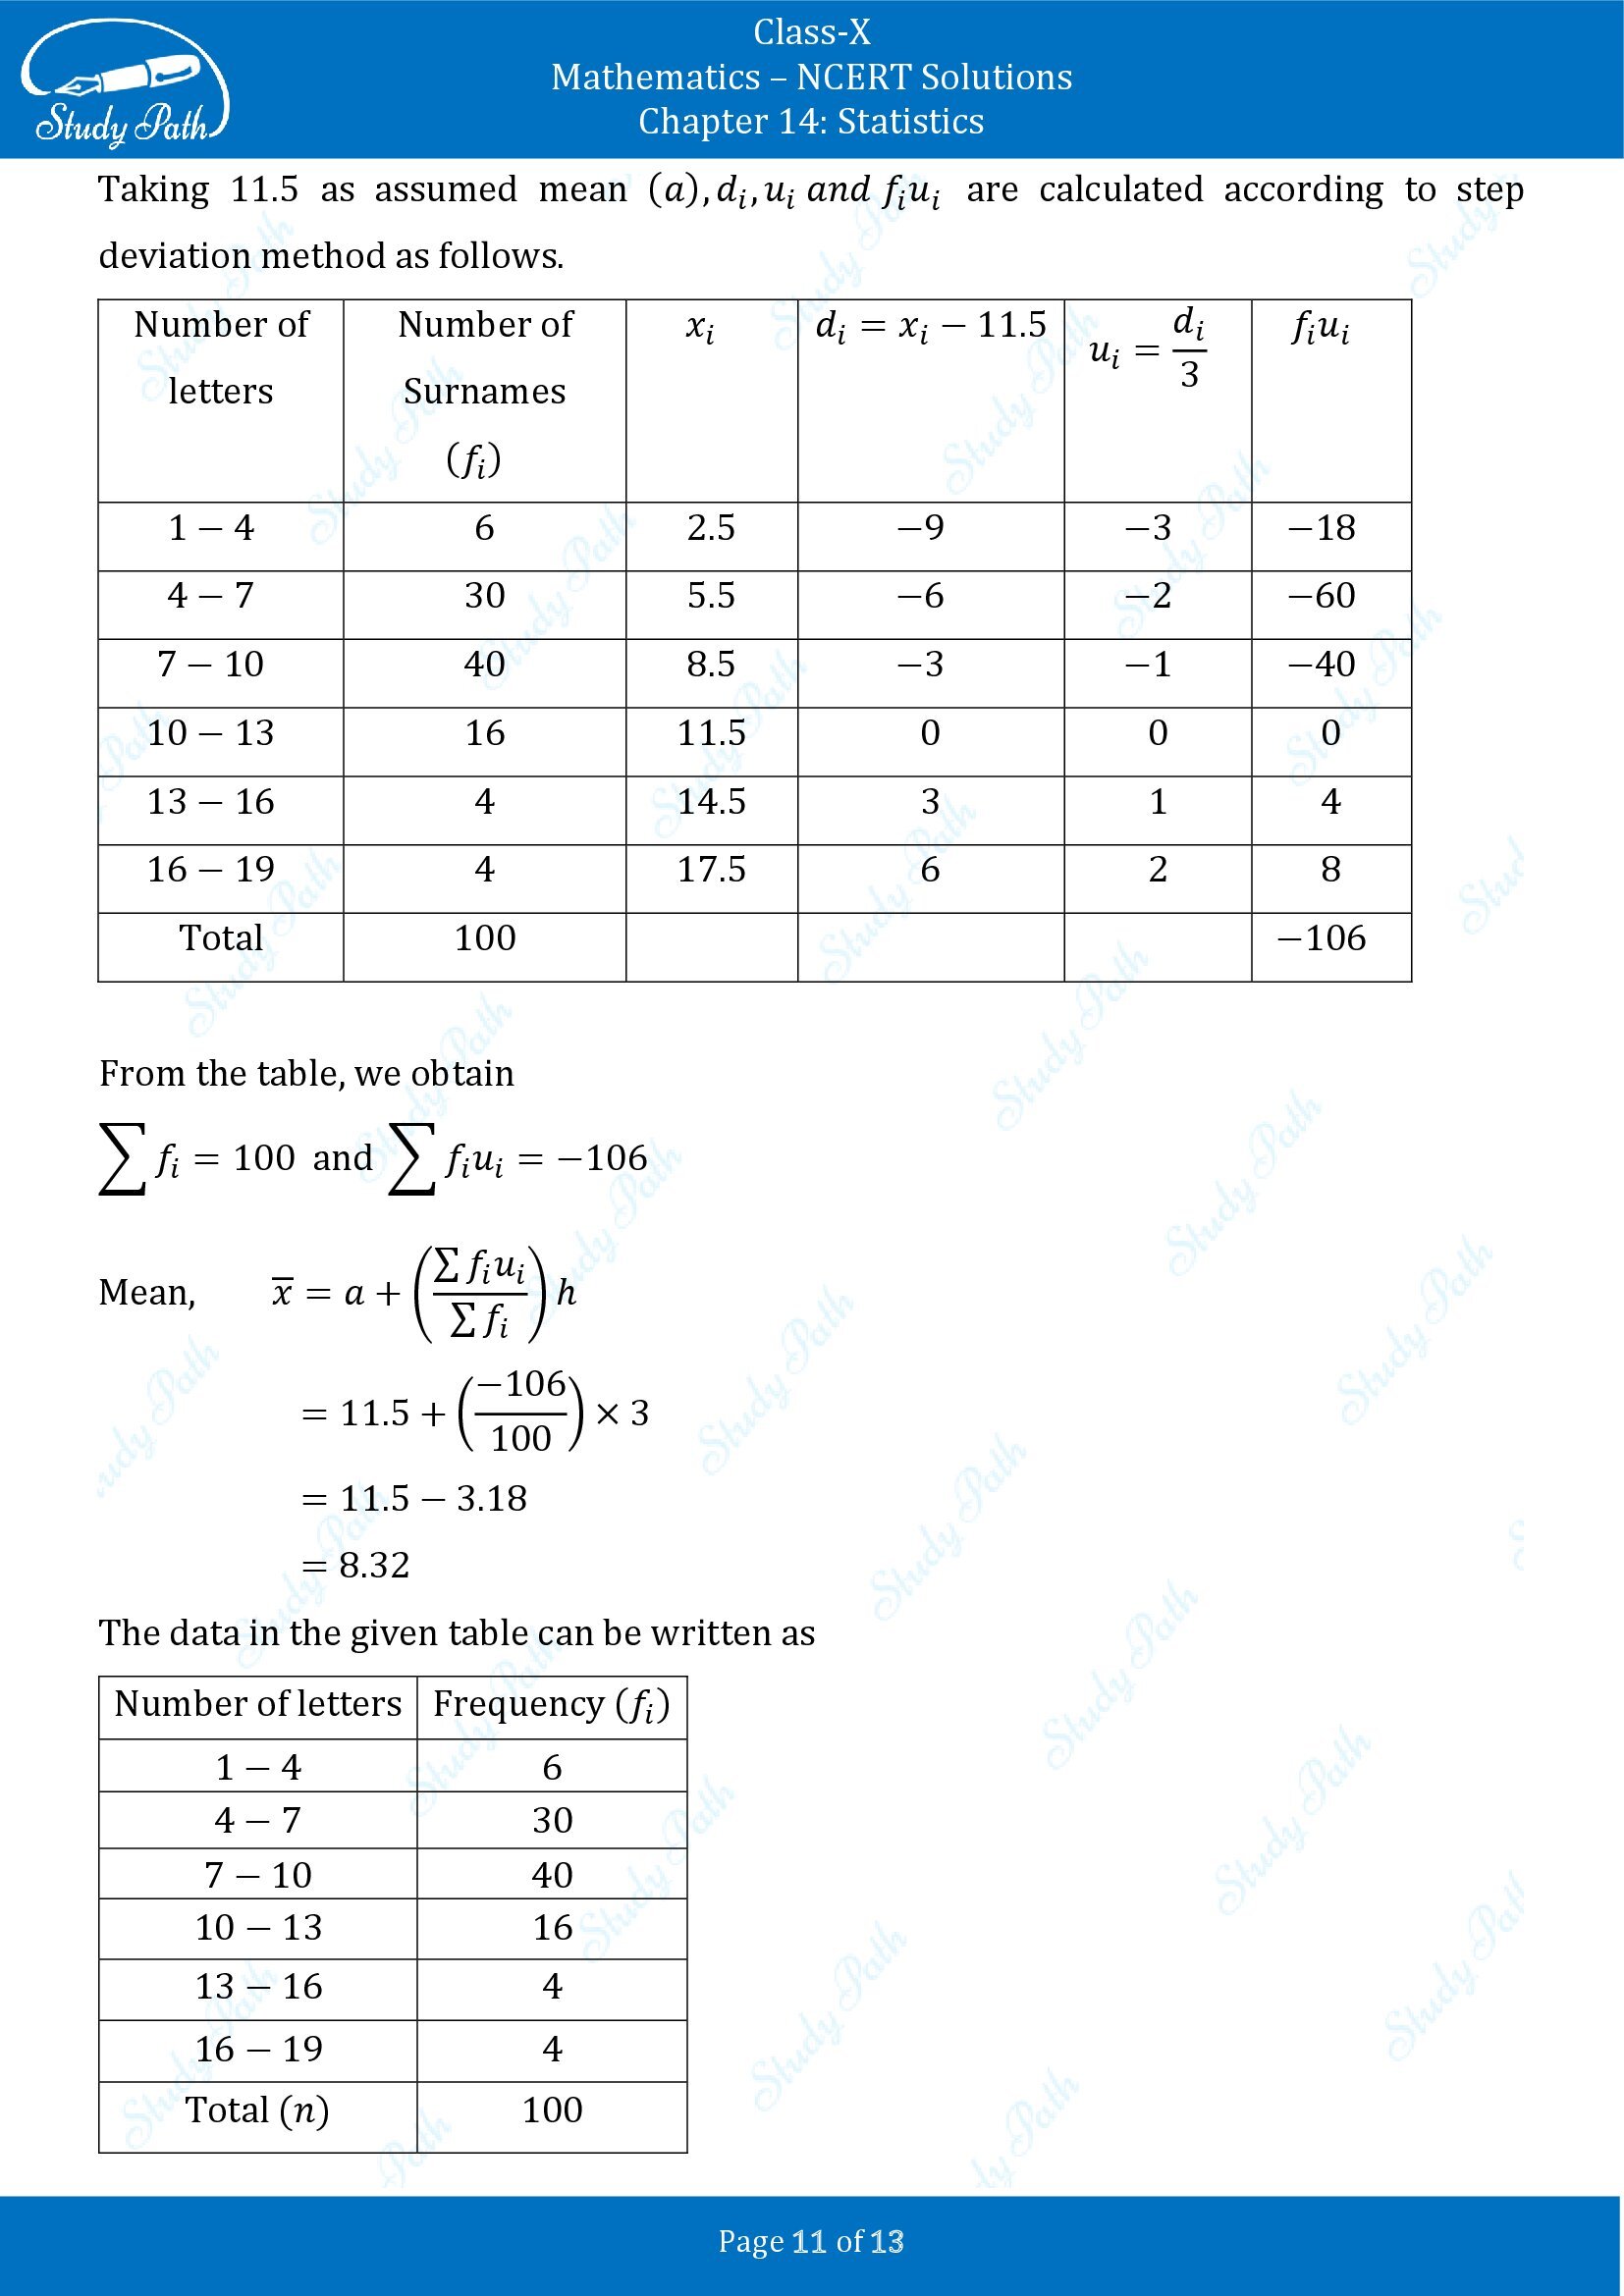 NCERT Solutions for Class 10 Maths Chapter 14 Statistics Exercise 14.3 00011